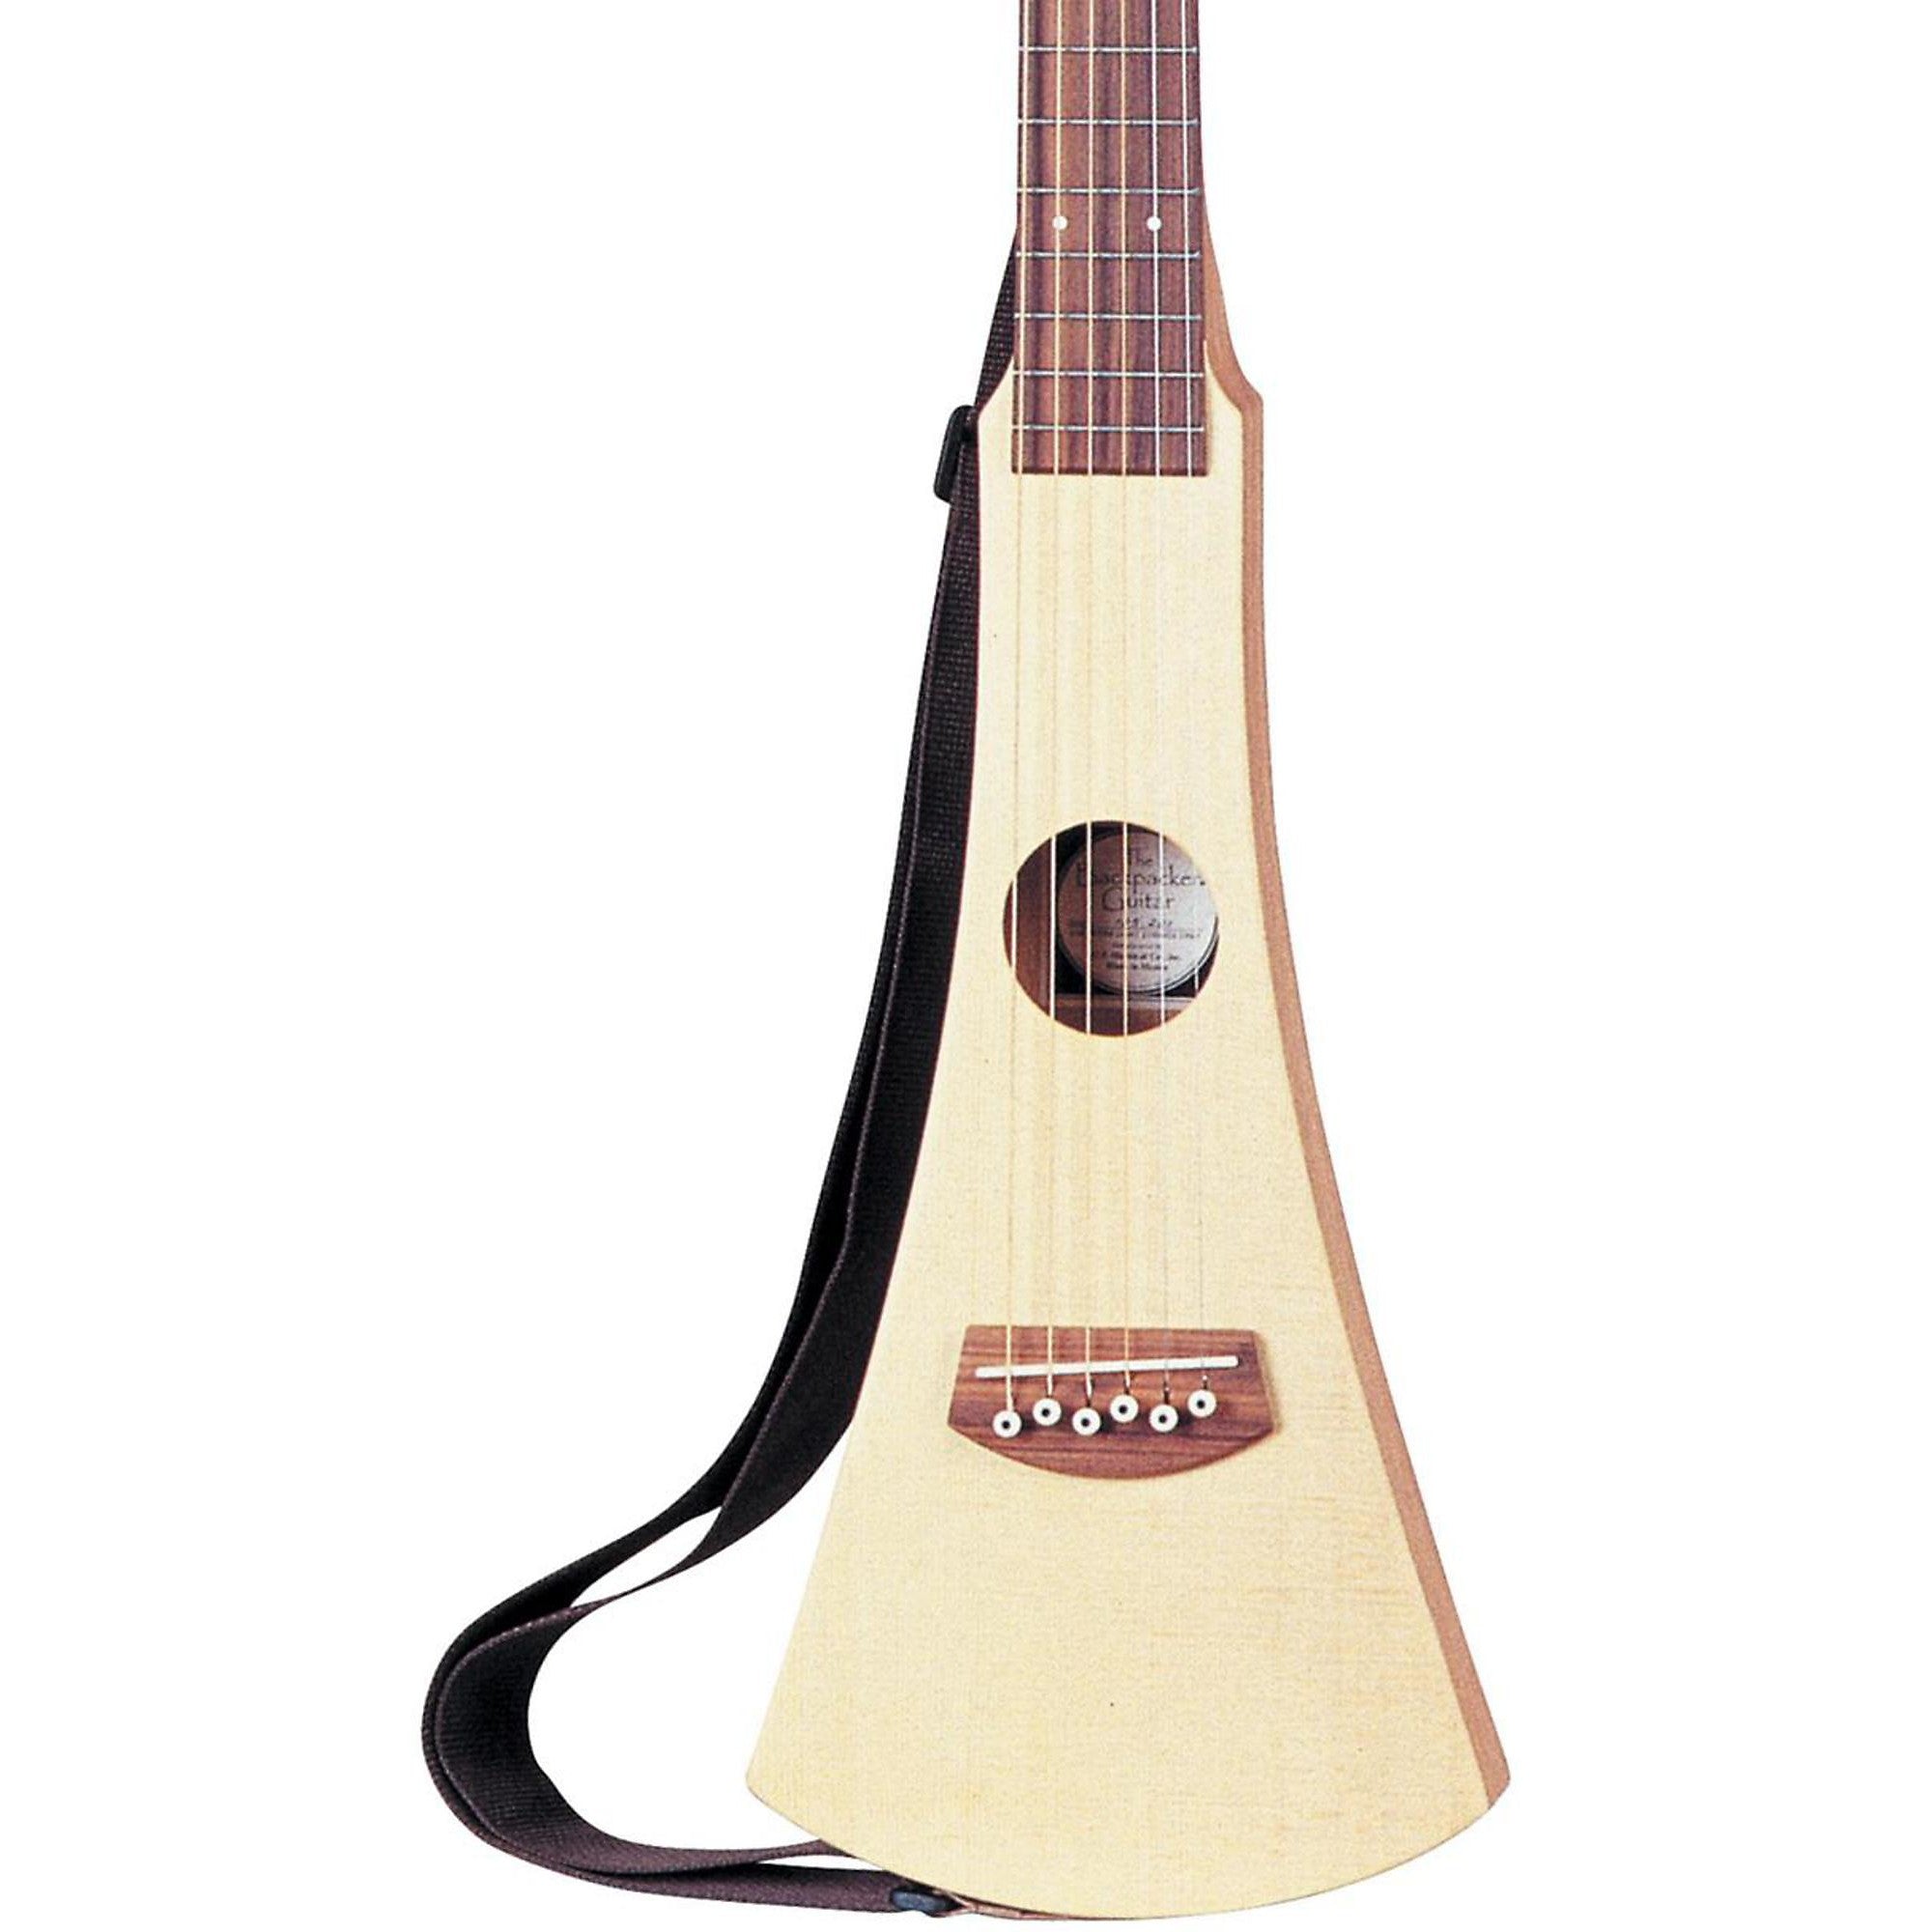 The Martin Steel-String Backpacker Acoustic Guitar